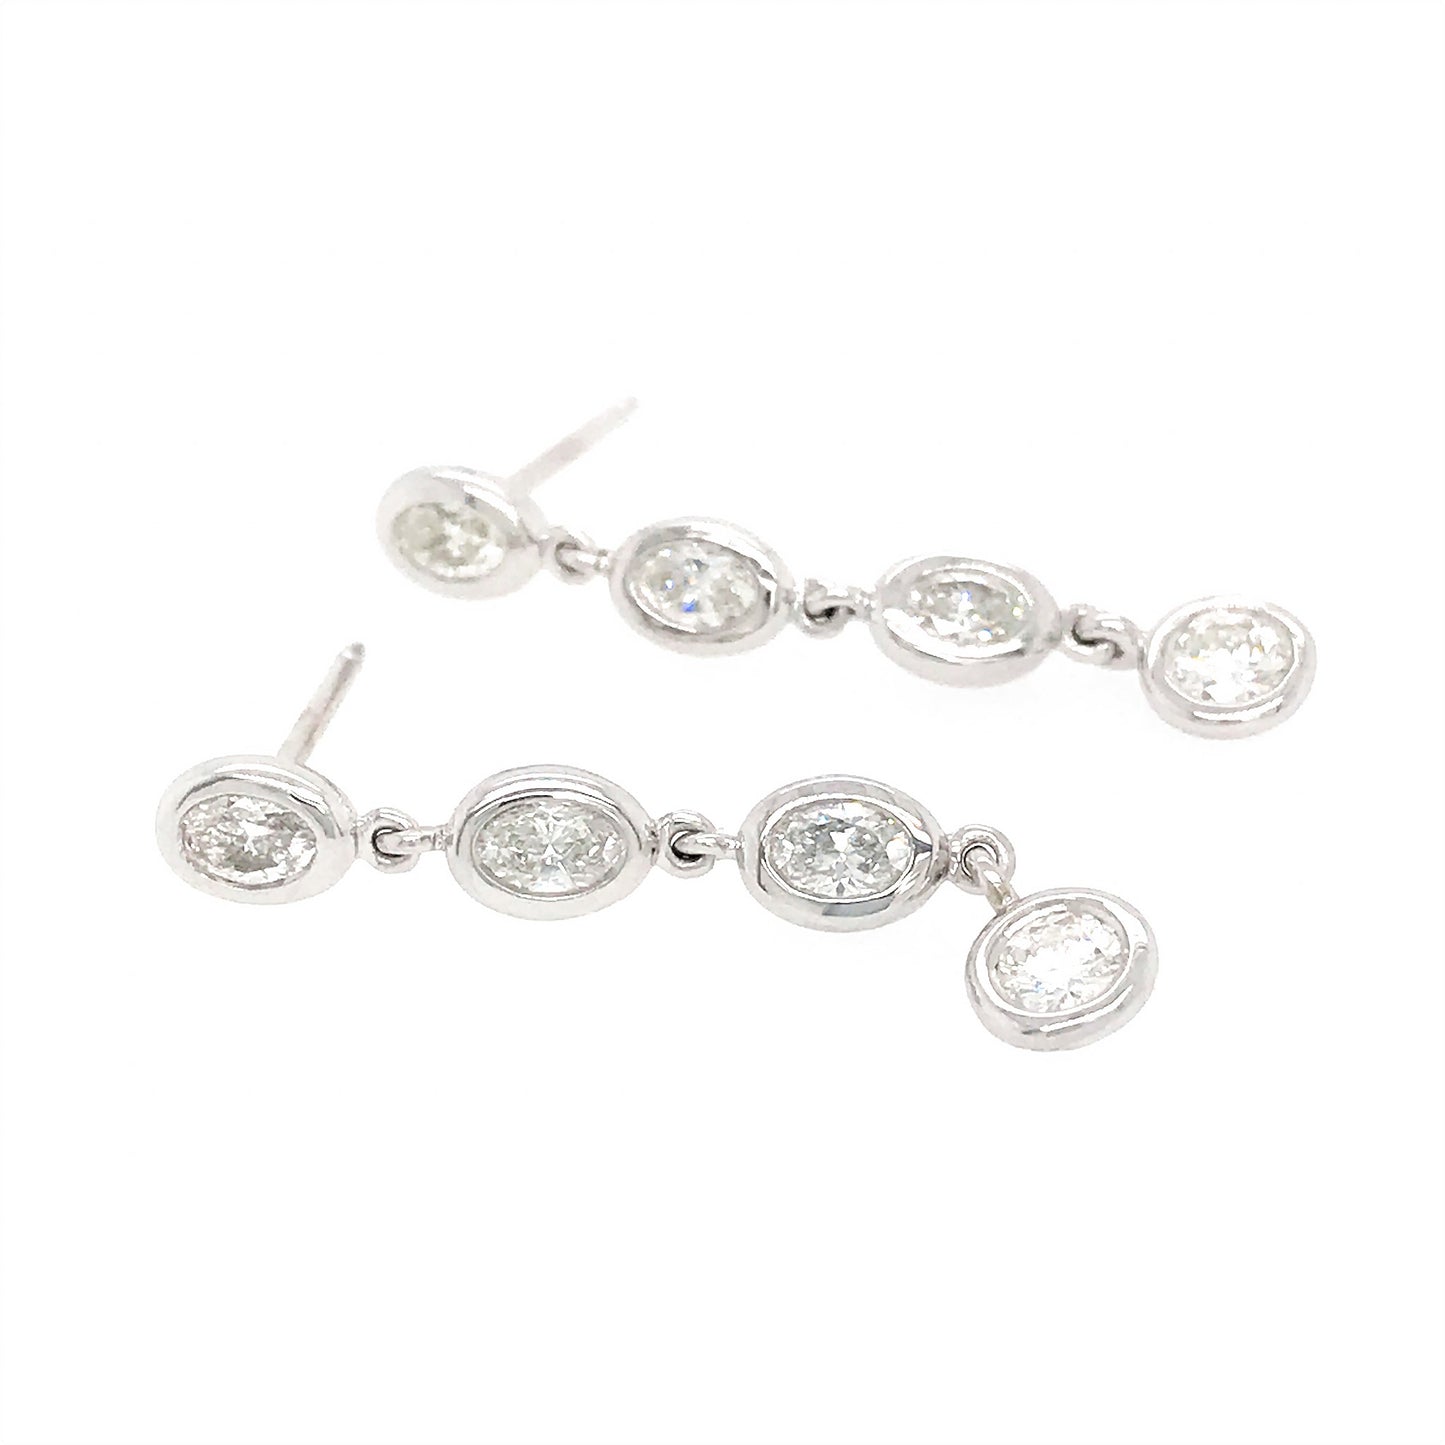 FAB DROPS 14k White Gold Oval and Round Diamond Drop Earrings